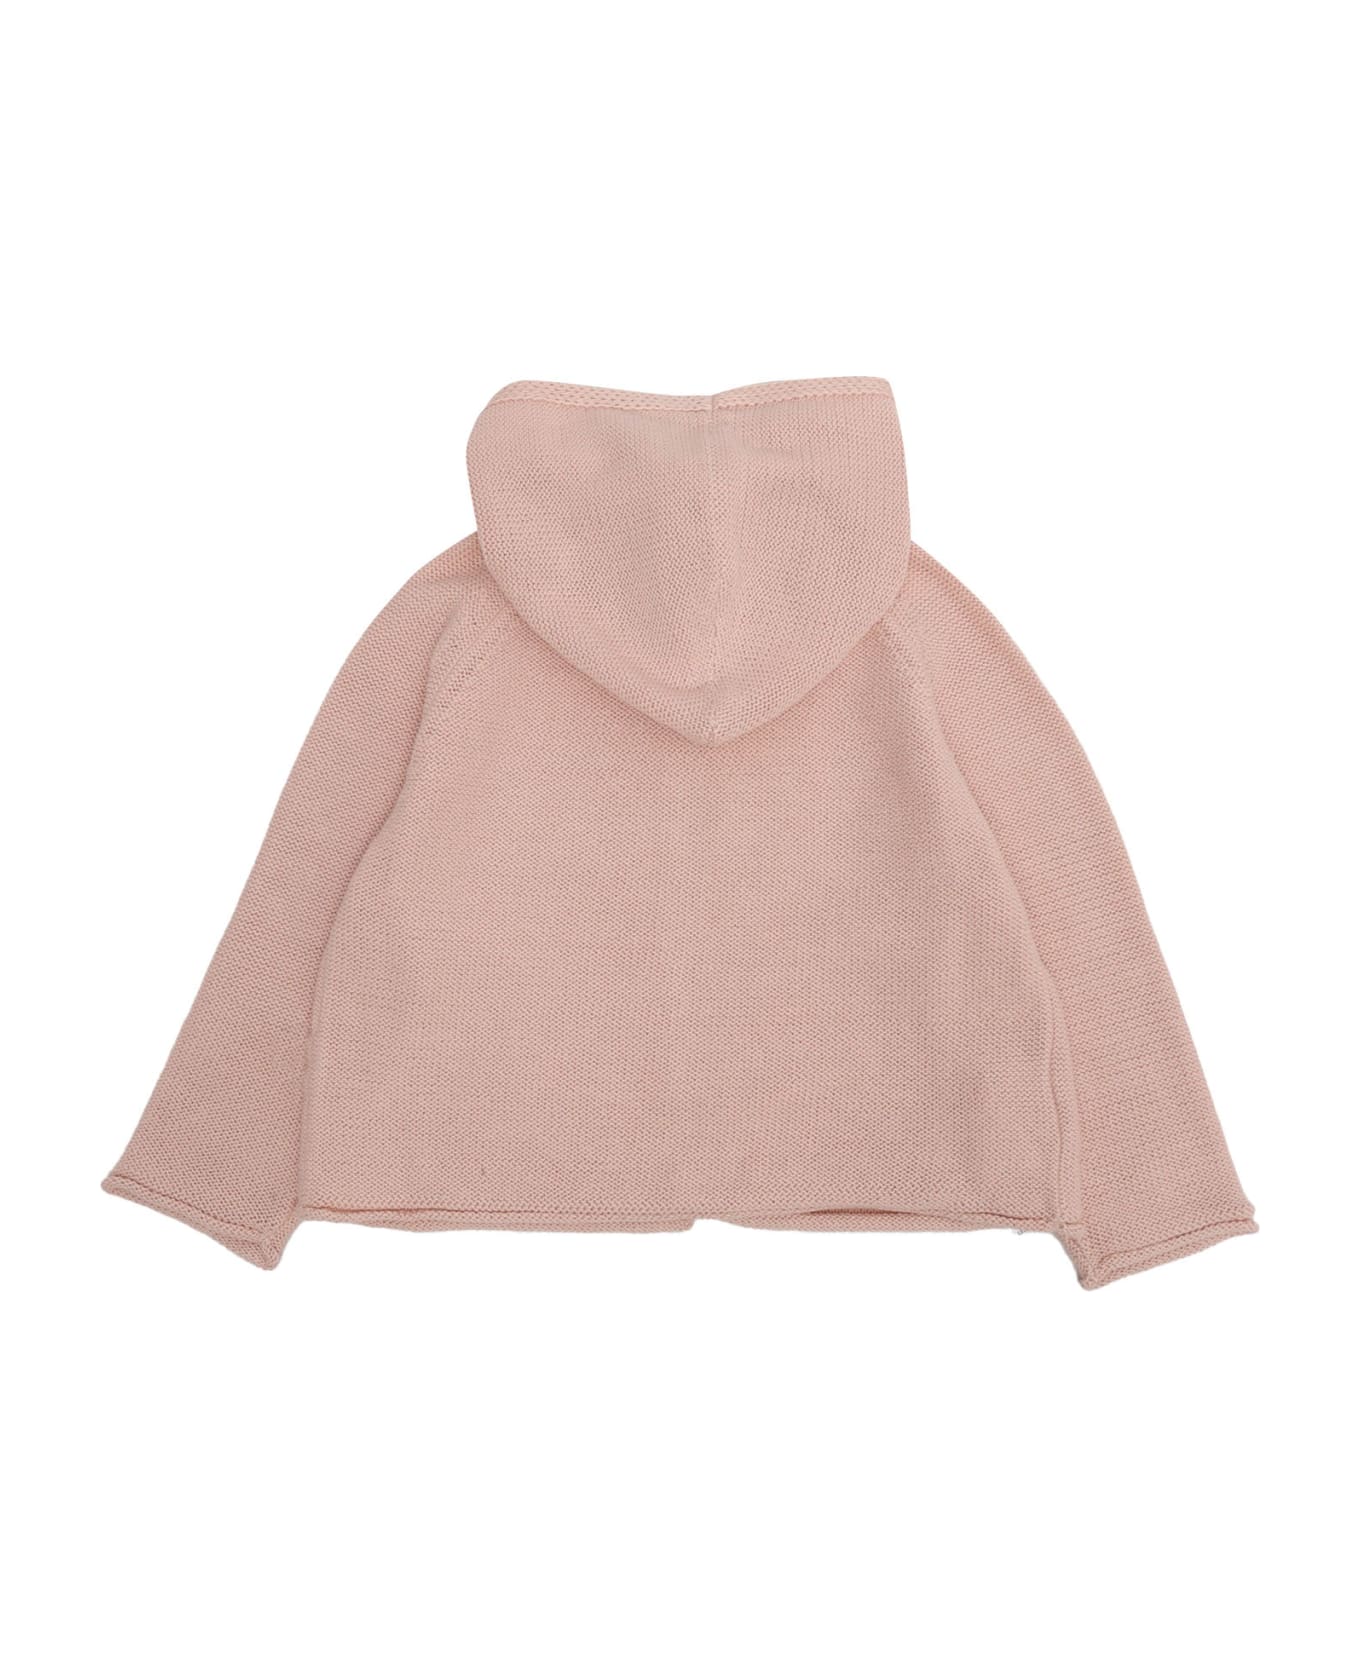 Teddy & Minou Knitted Sweater For Girls - PINK